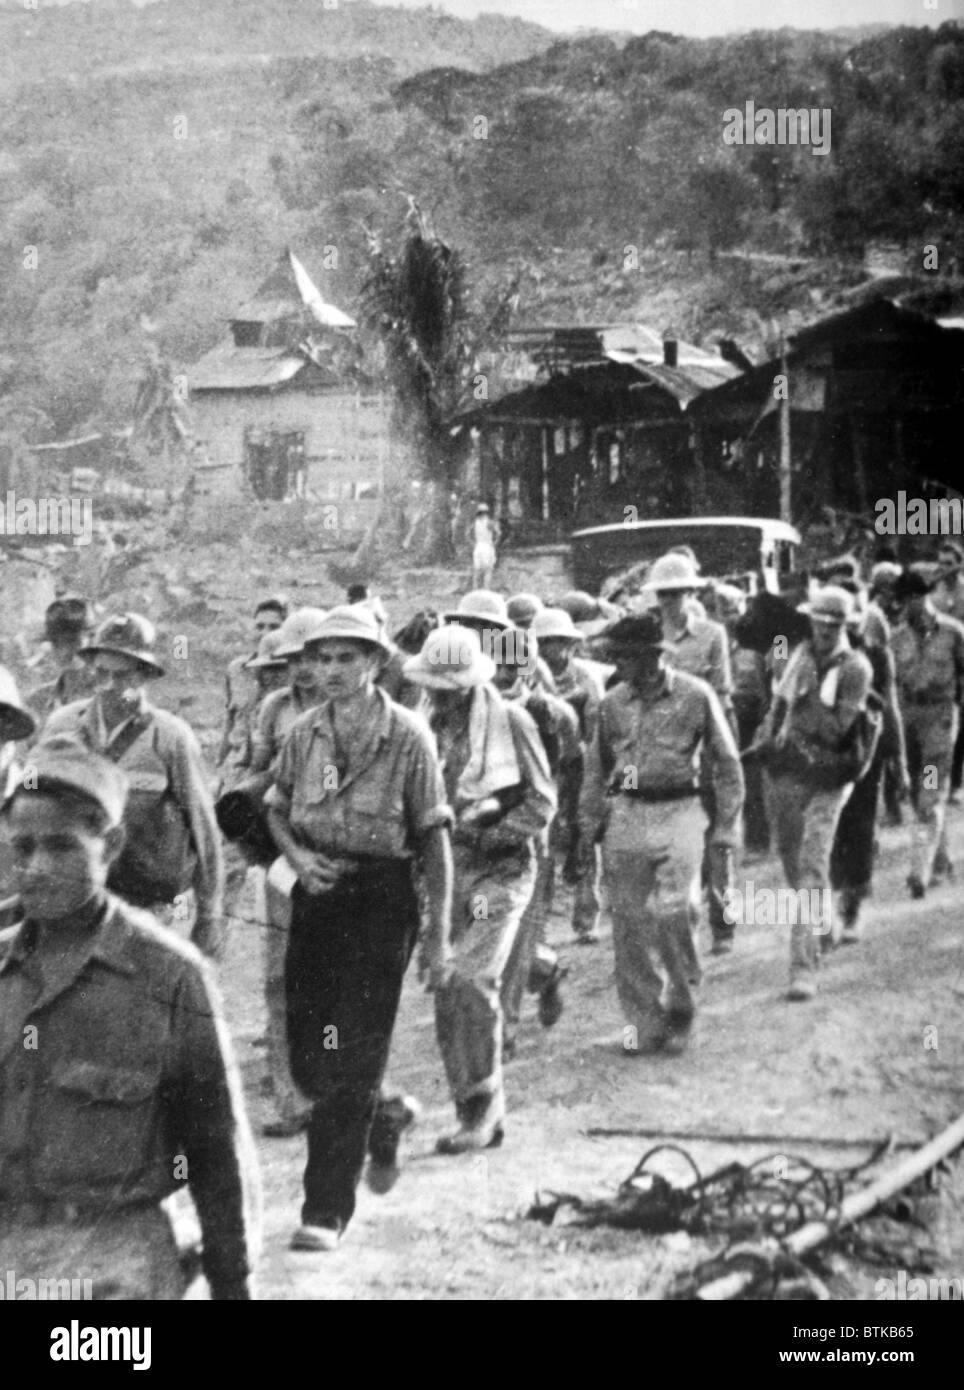 World War II, The Bataan Death March in the Philippines, 1942. Stock Photo